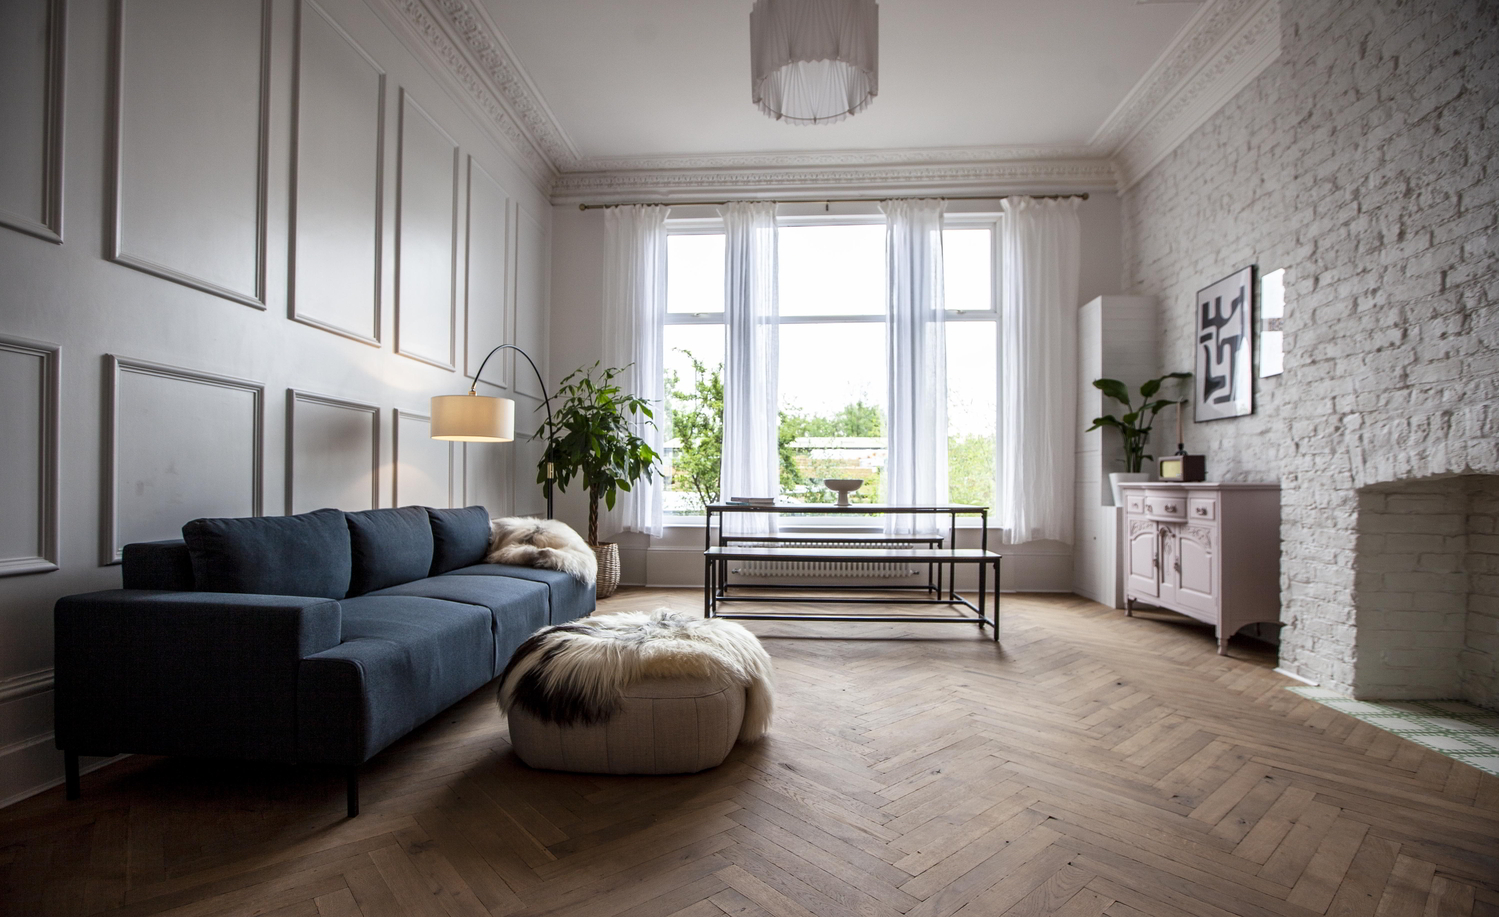 The Place of Wood Flooring in Transitional Interiors